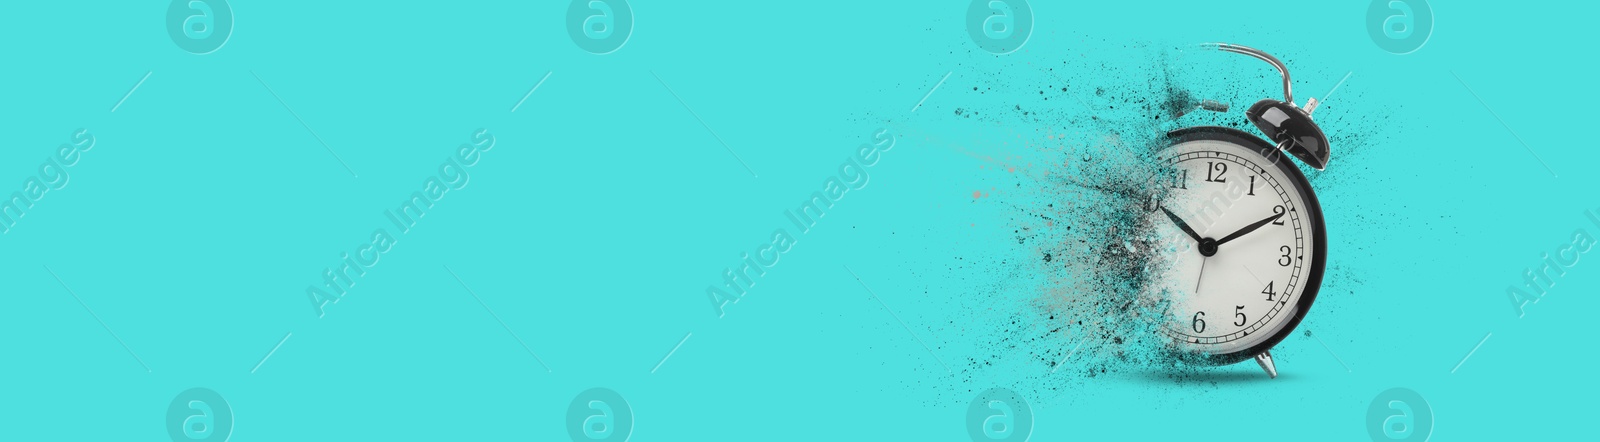 Image of Black alarm clock dissolving on turquoise background, banner design with space for text. Flow of time